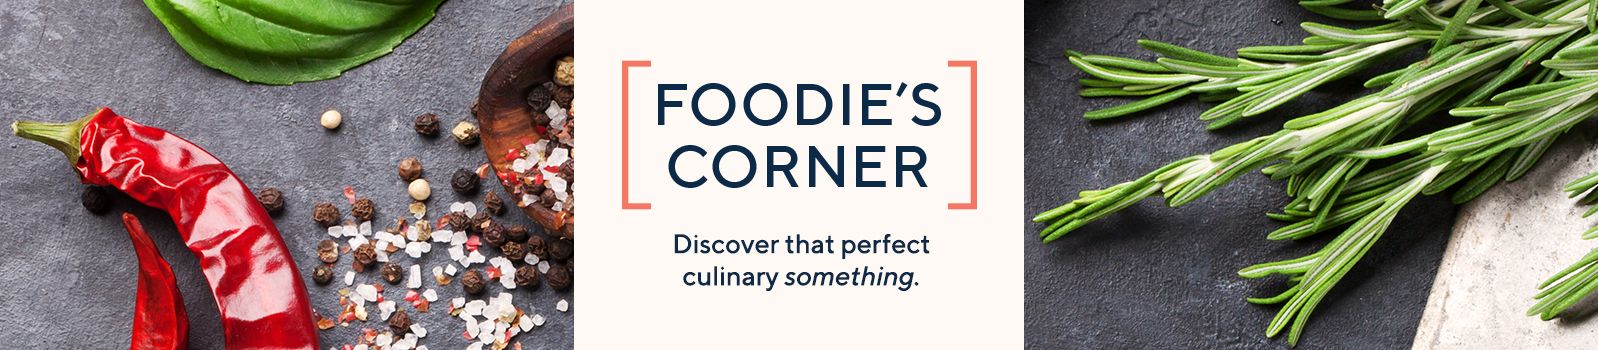 Foodie's Corner.  Discover that perfect culinary something. 